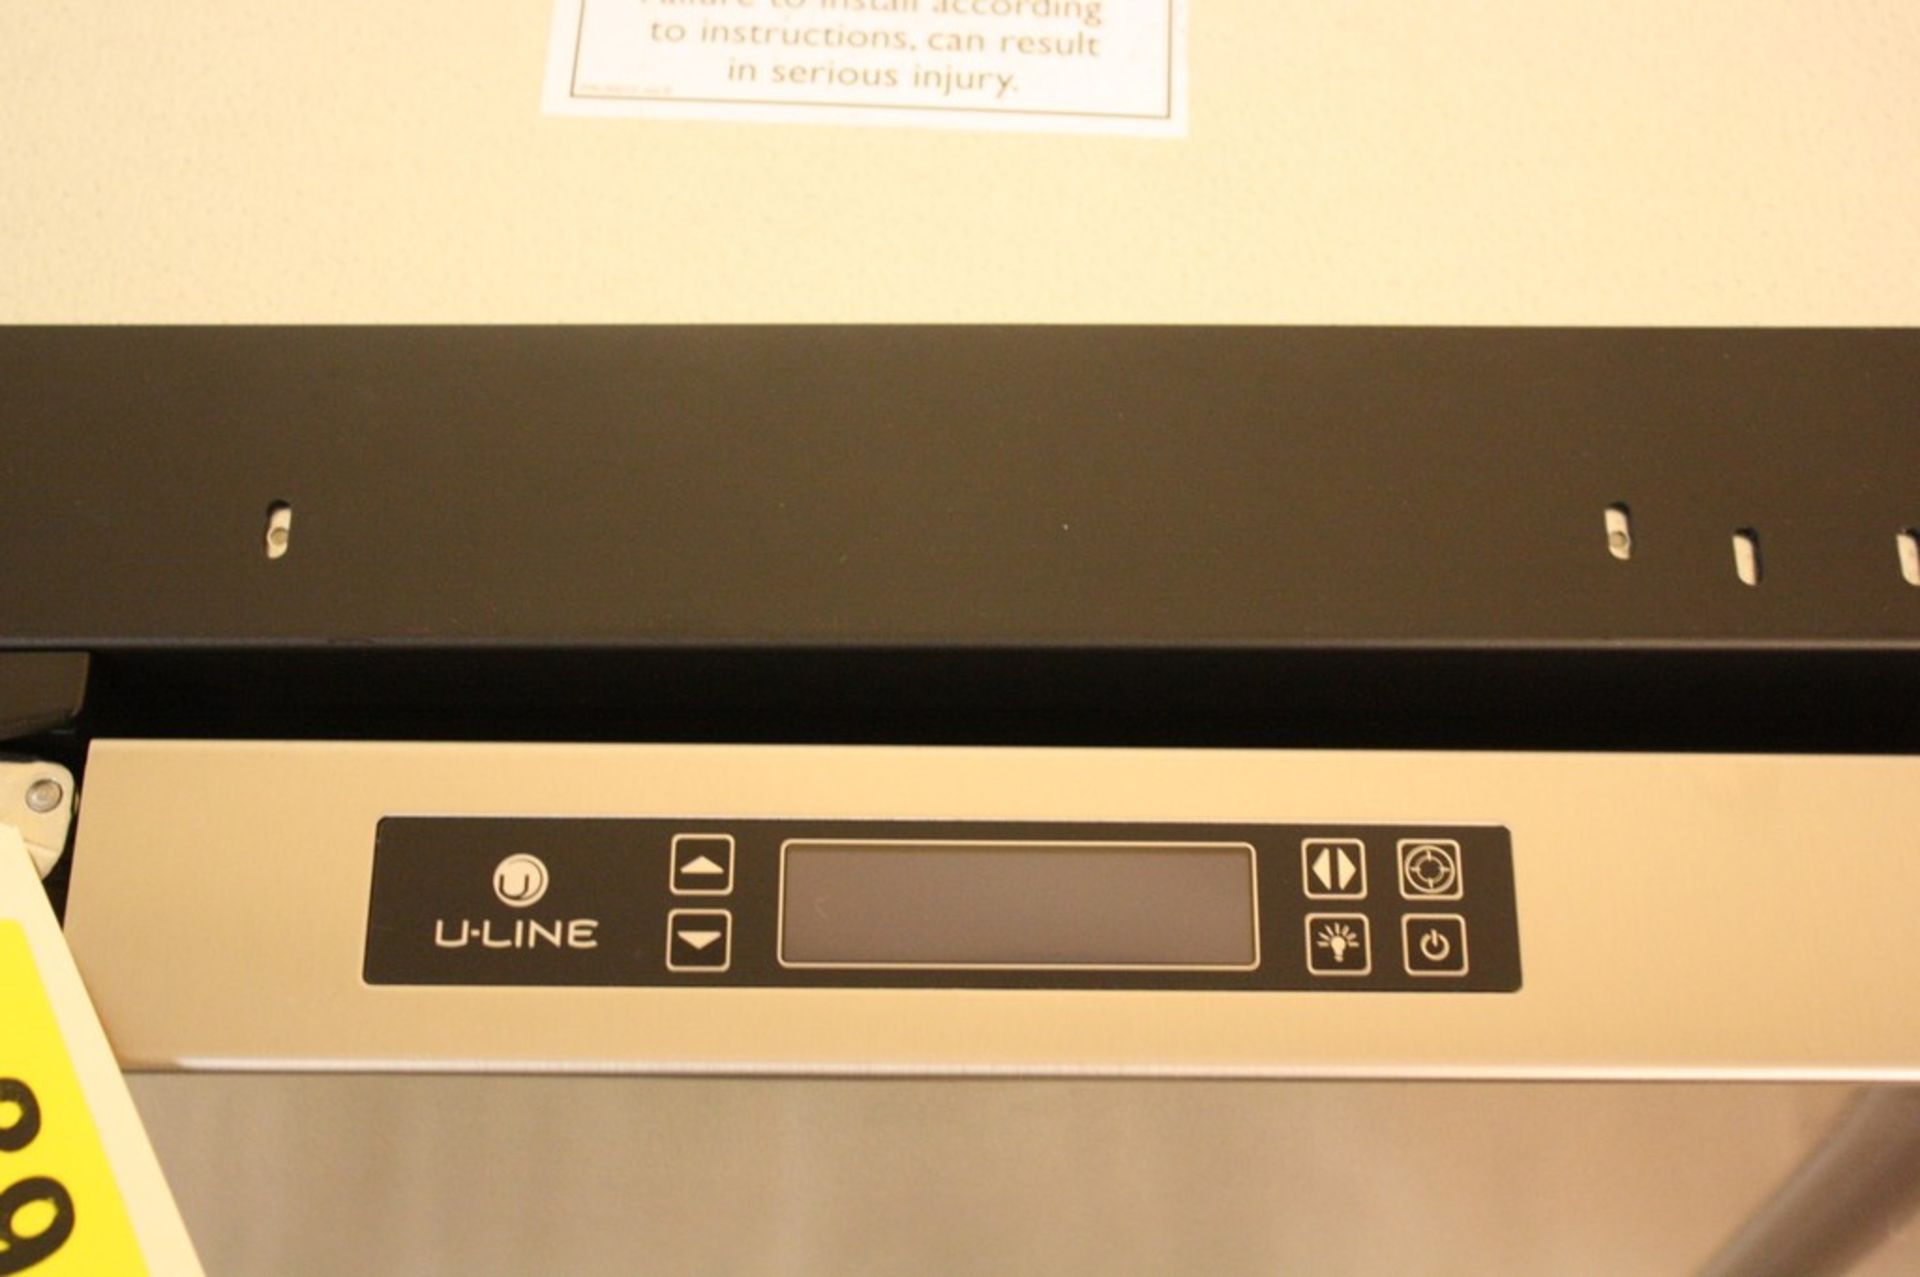 U-LINE MODEL U-3018CLRS-41A CLEAR ICE MAKER S/N 1539071080004: 3000 Series, 18 Inch Built-In Clear - Image 3 of 3